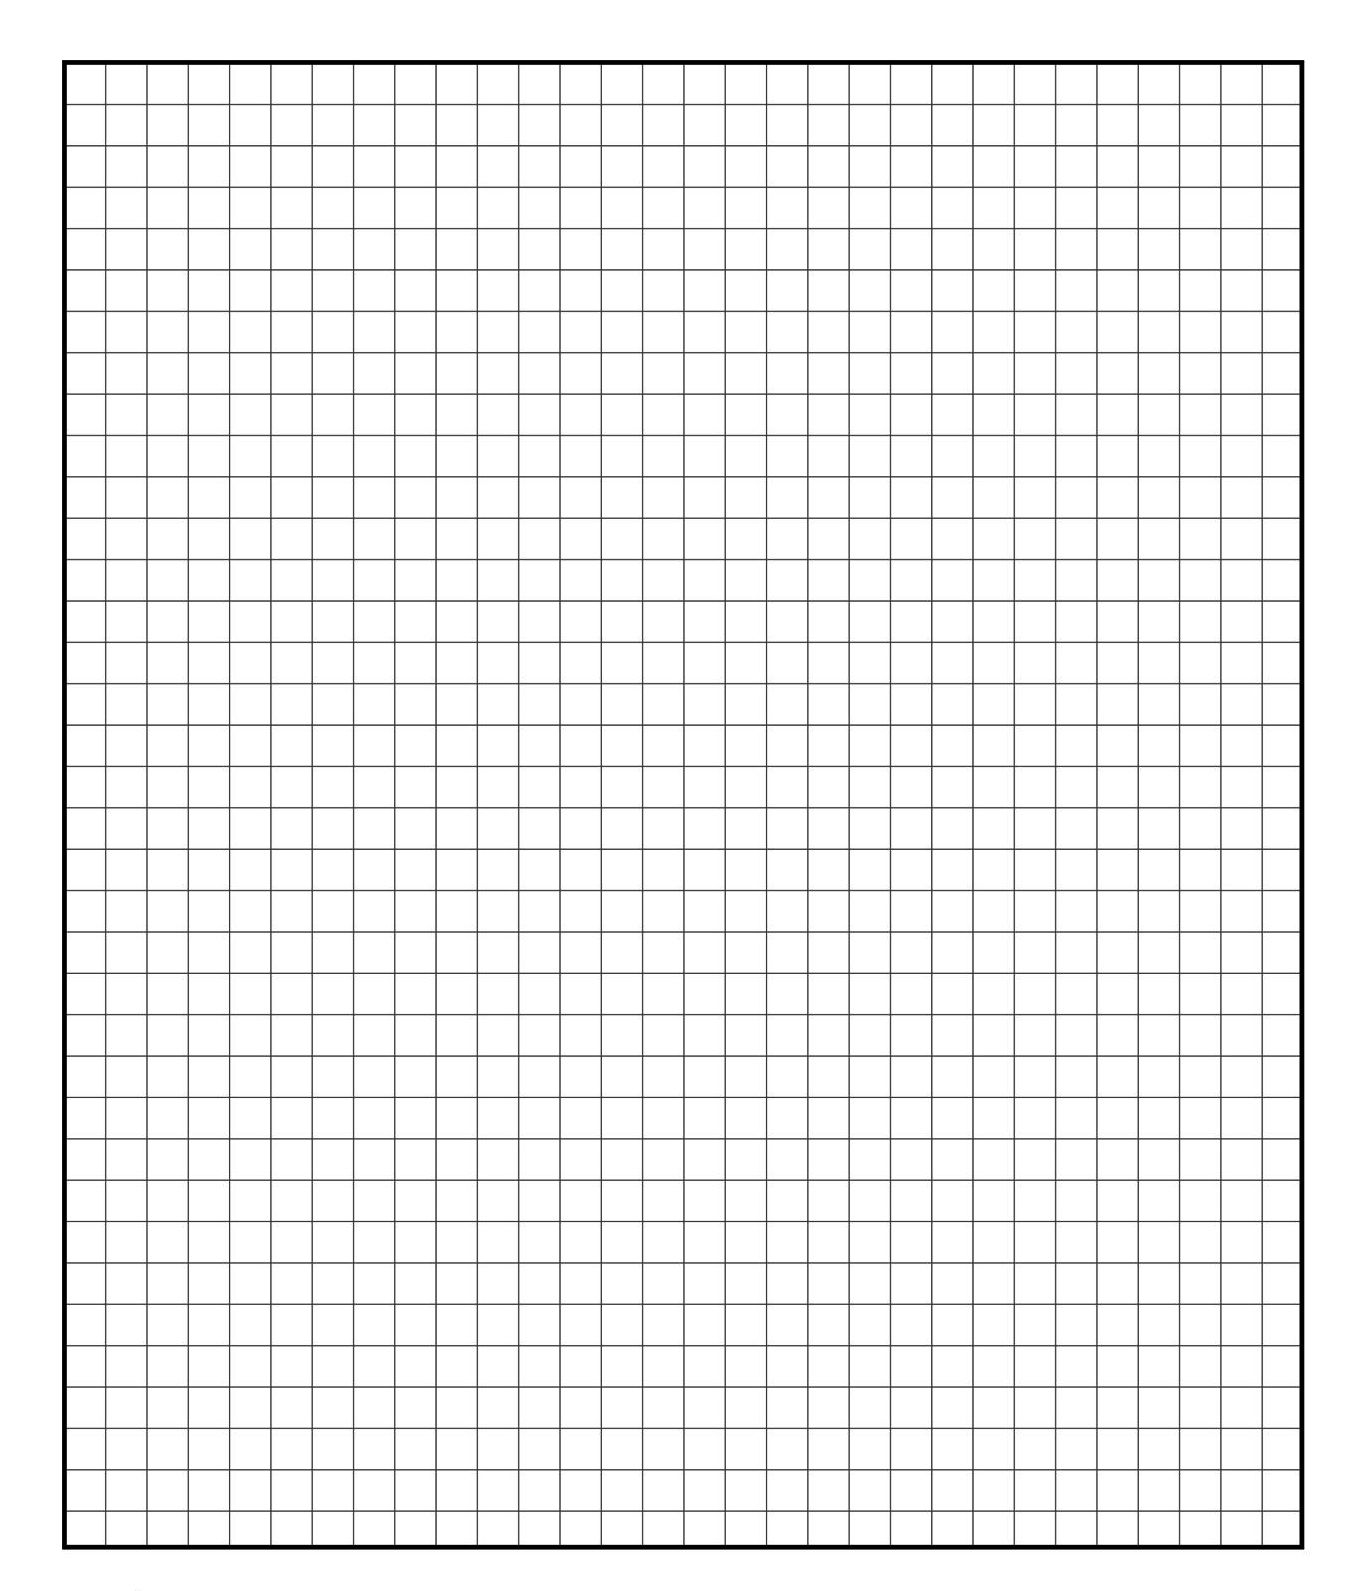 1-mm-grid-paper-printable-grid-paper-printable-graph-paper-to-print-images